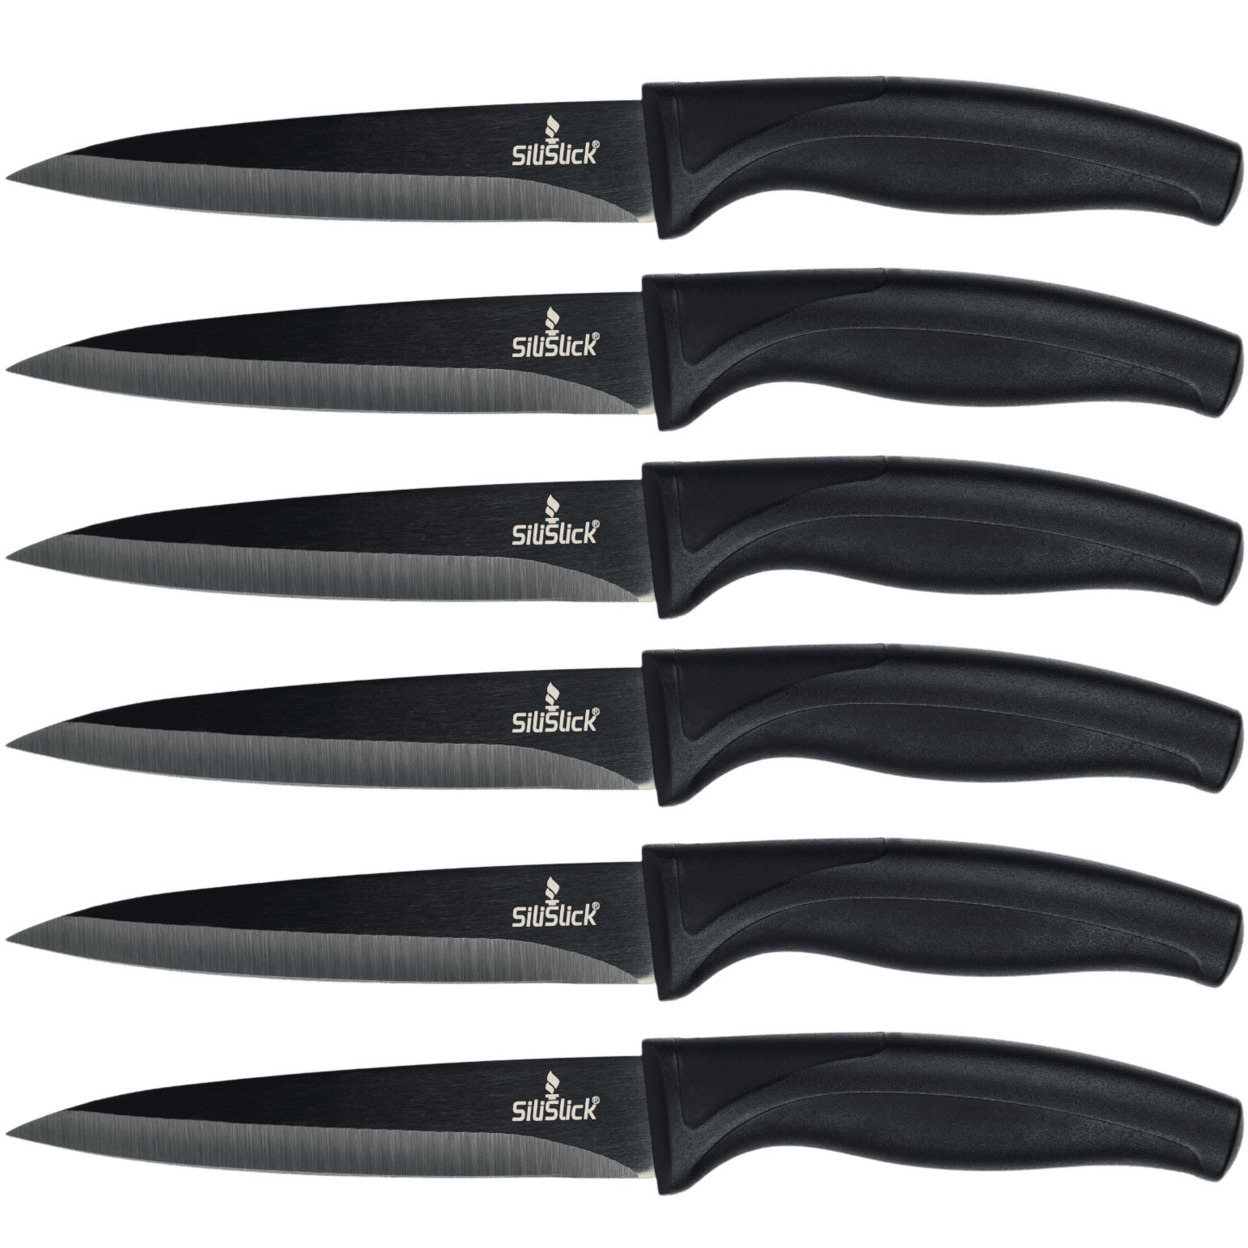 SiliSlick Stainless Steel Steak Knife Set Of 6 -Black Handle And Black Blade - Titanium Coated With Straight Edge For Cutting Meat